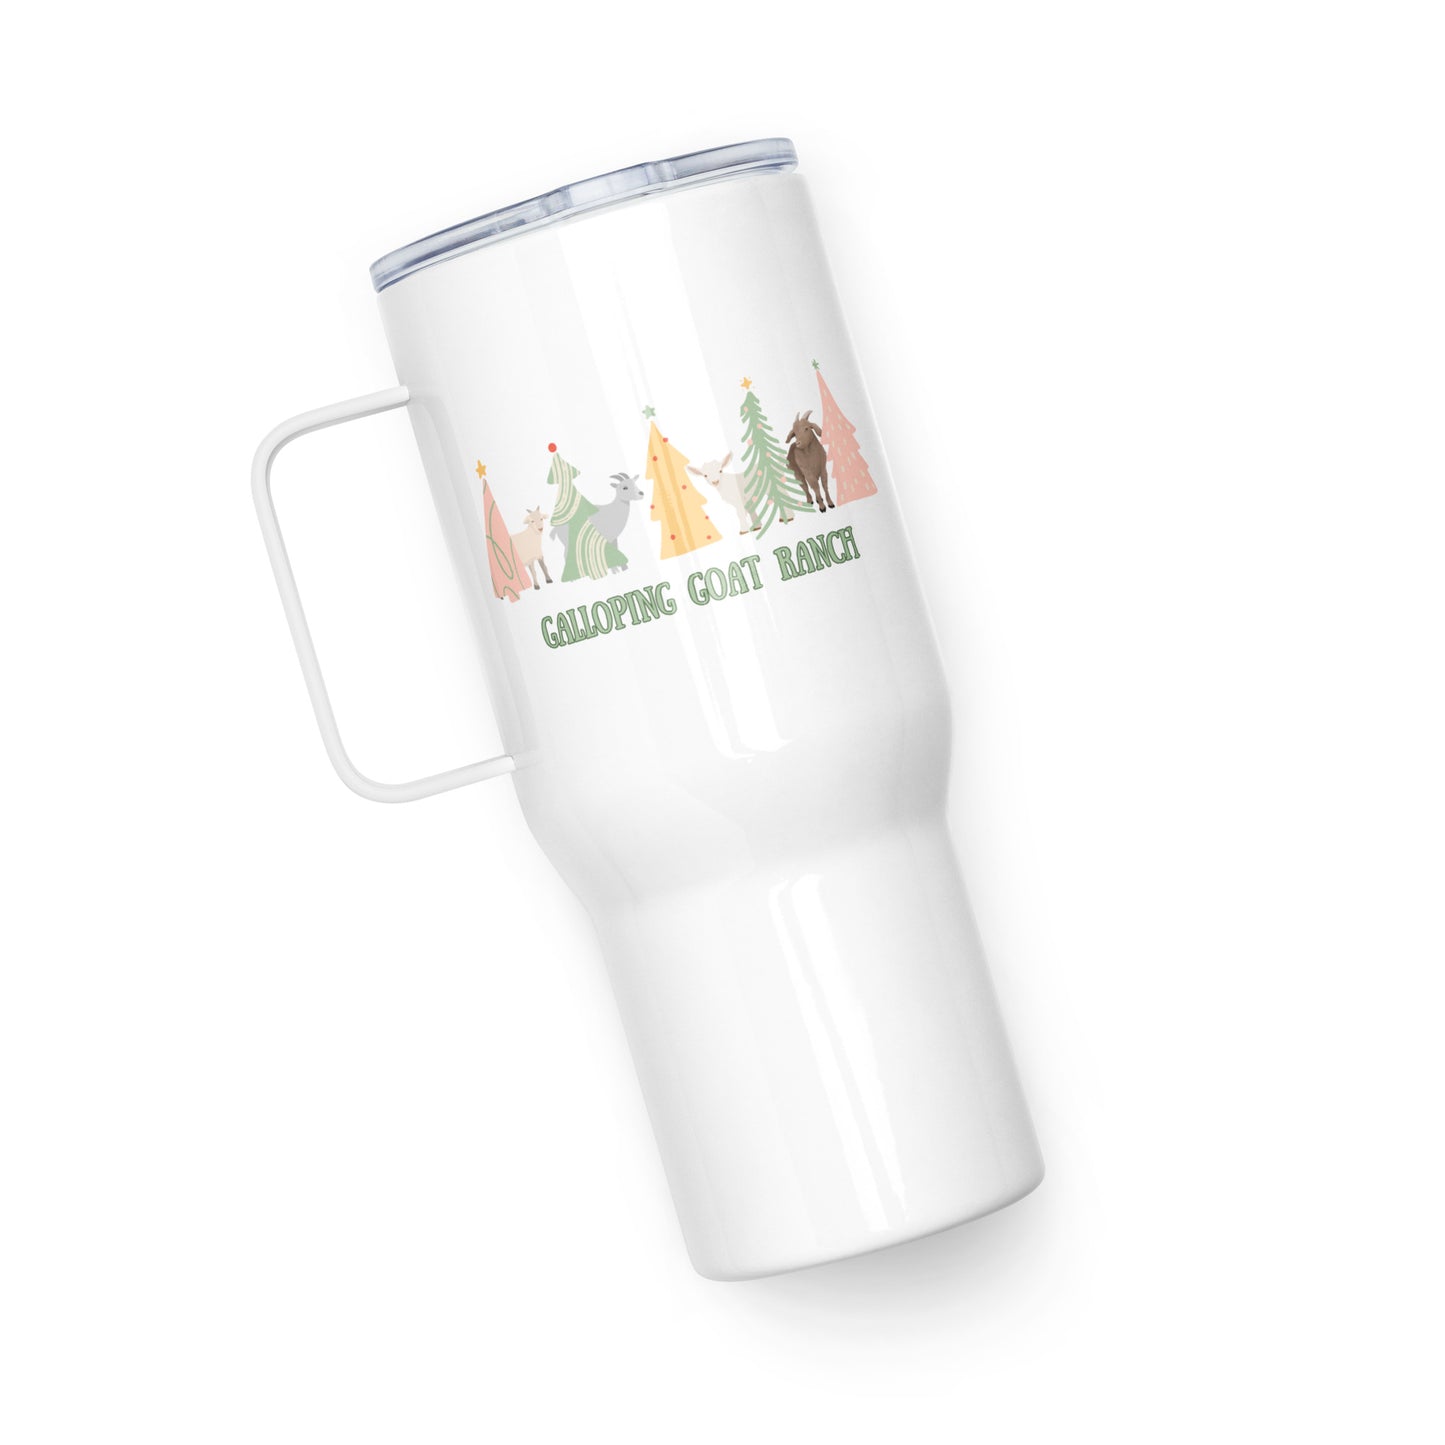 Galloping Goats in Trees: Travel mug with a handle